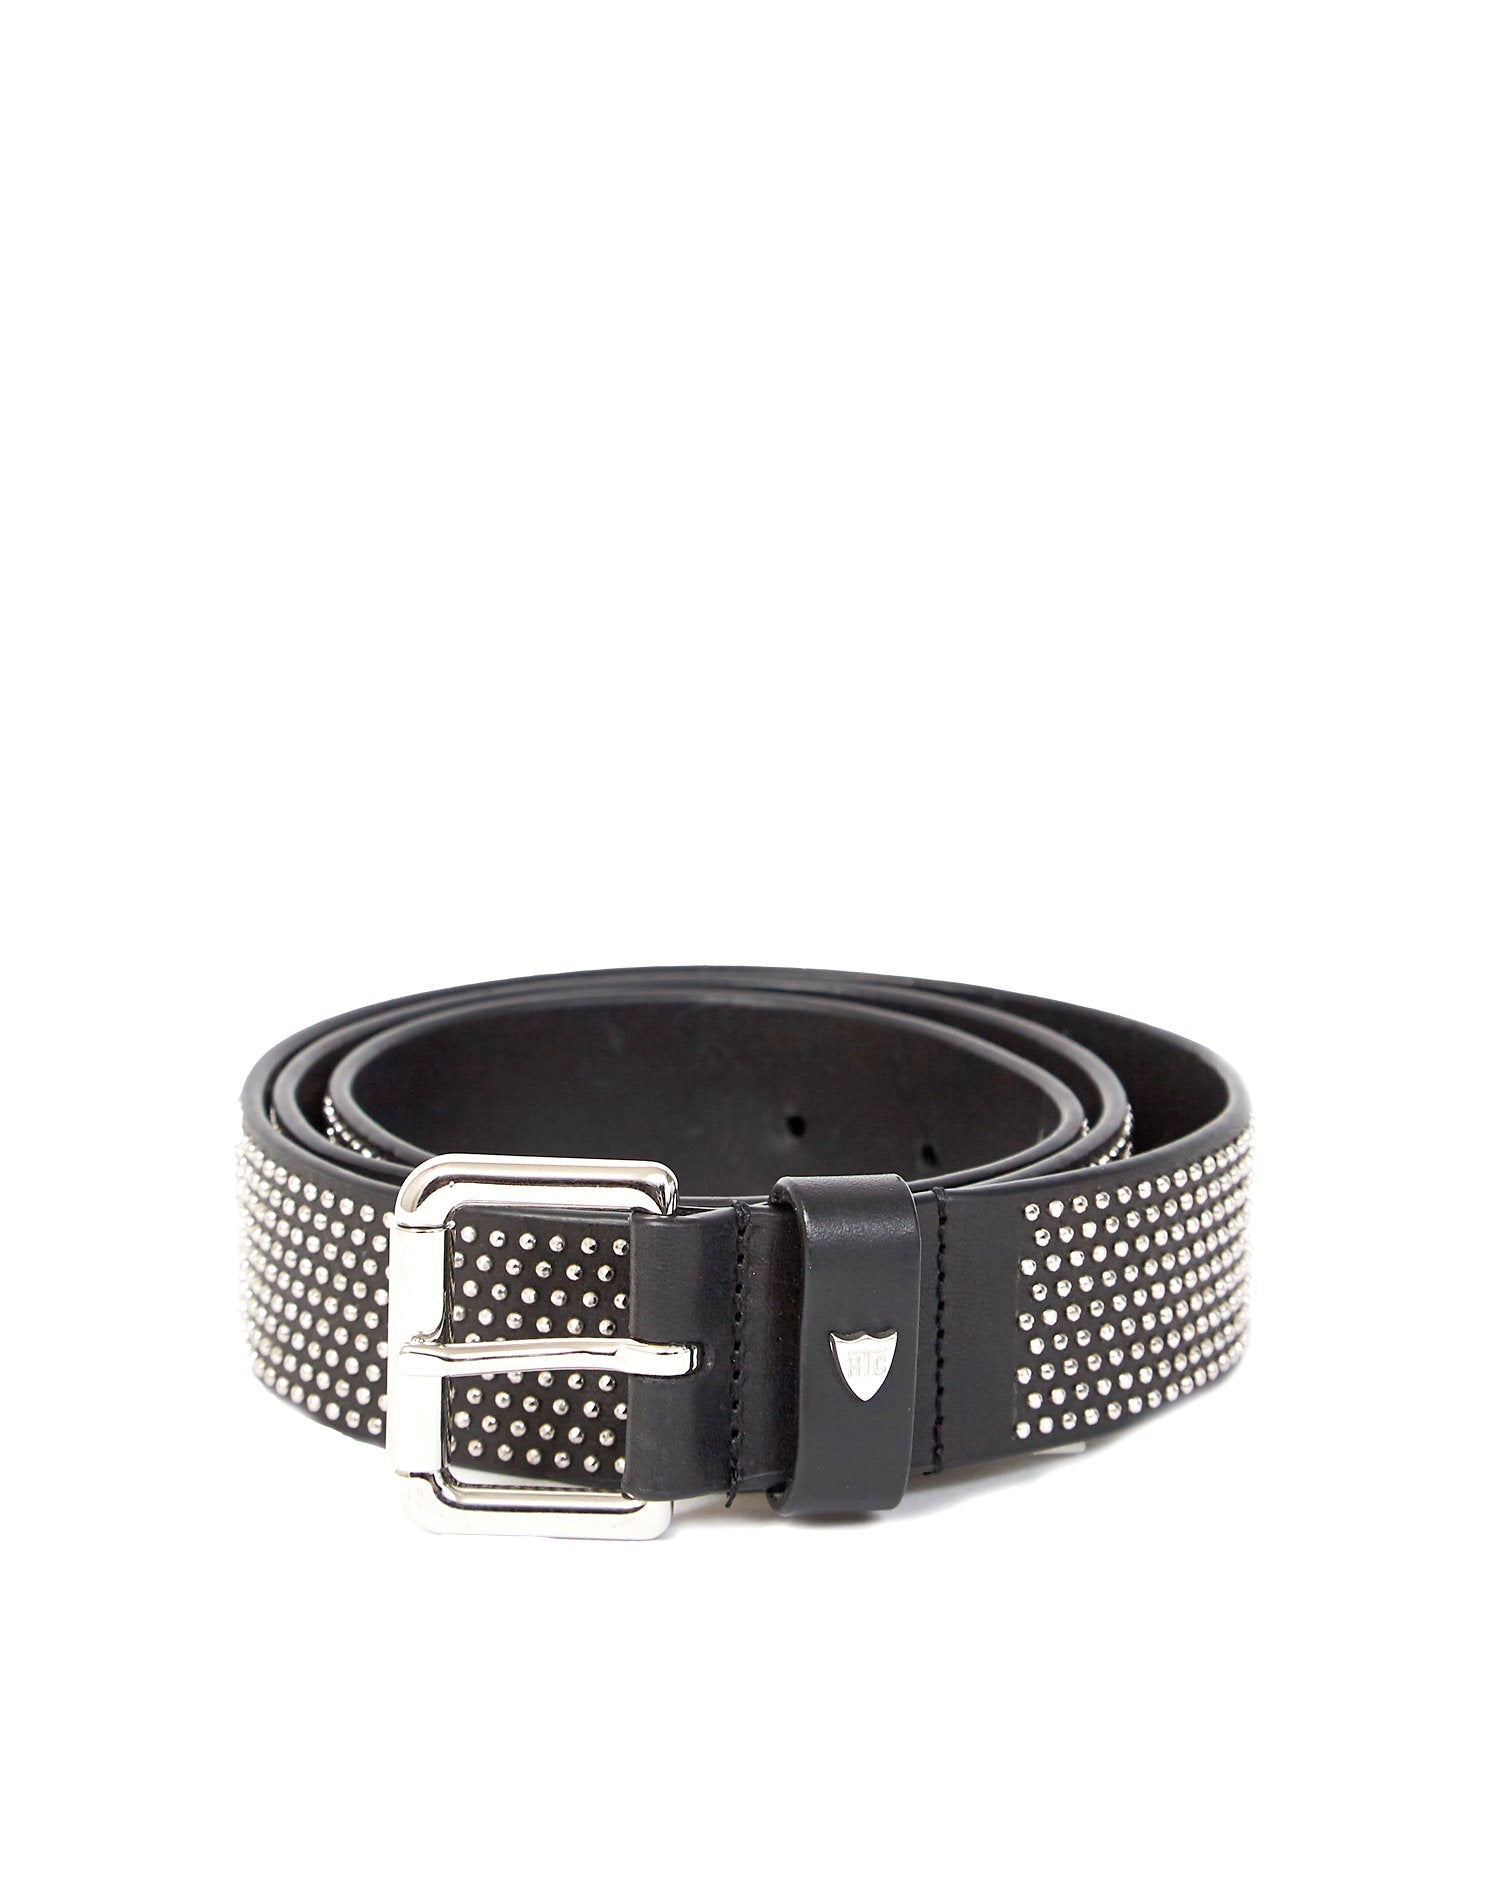 SOPHIA SLIM BELT Black leather belt with microstuds, buckle and belt loop in shiny metal. Height: 2,5 cm. Made in Italy. HTC LOS ANGELES